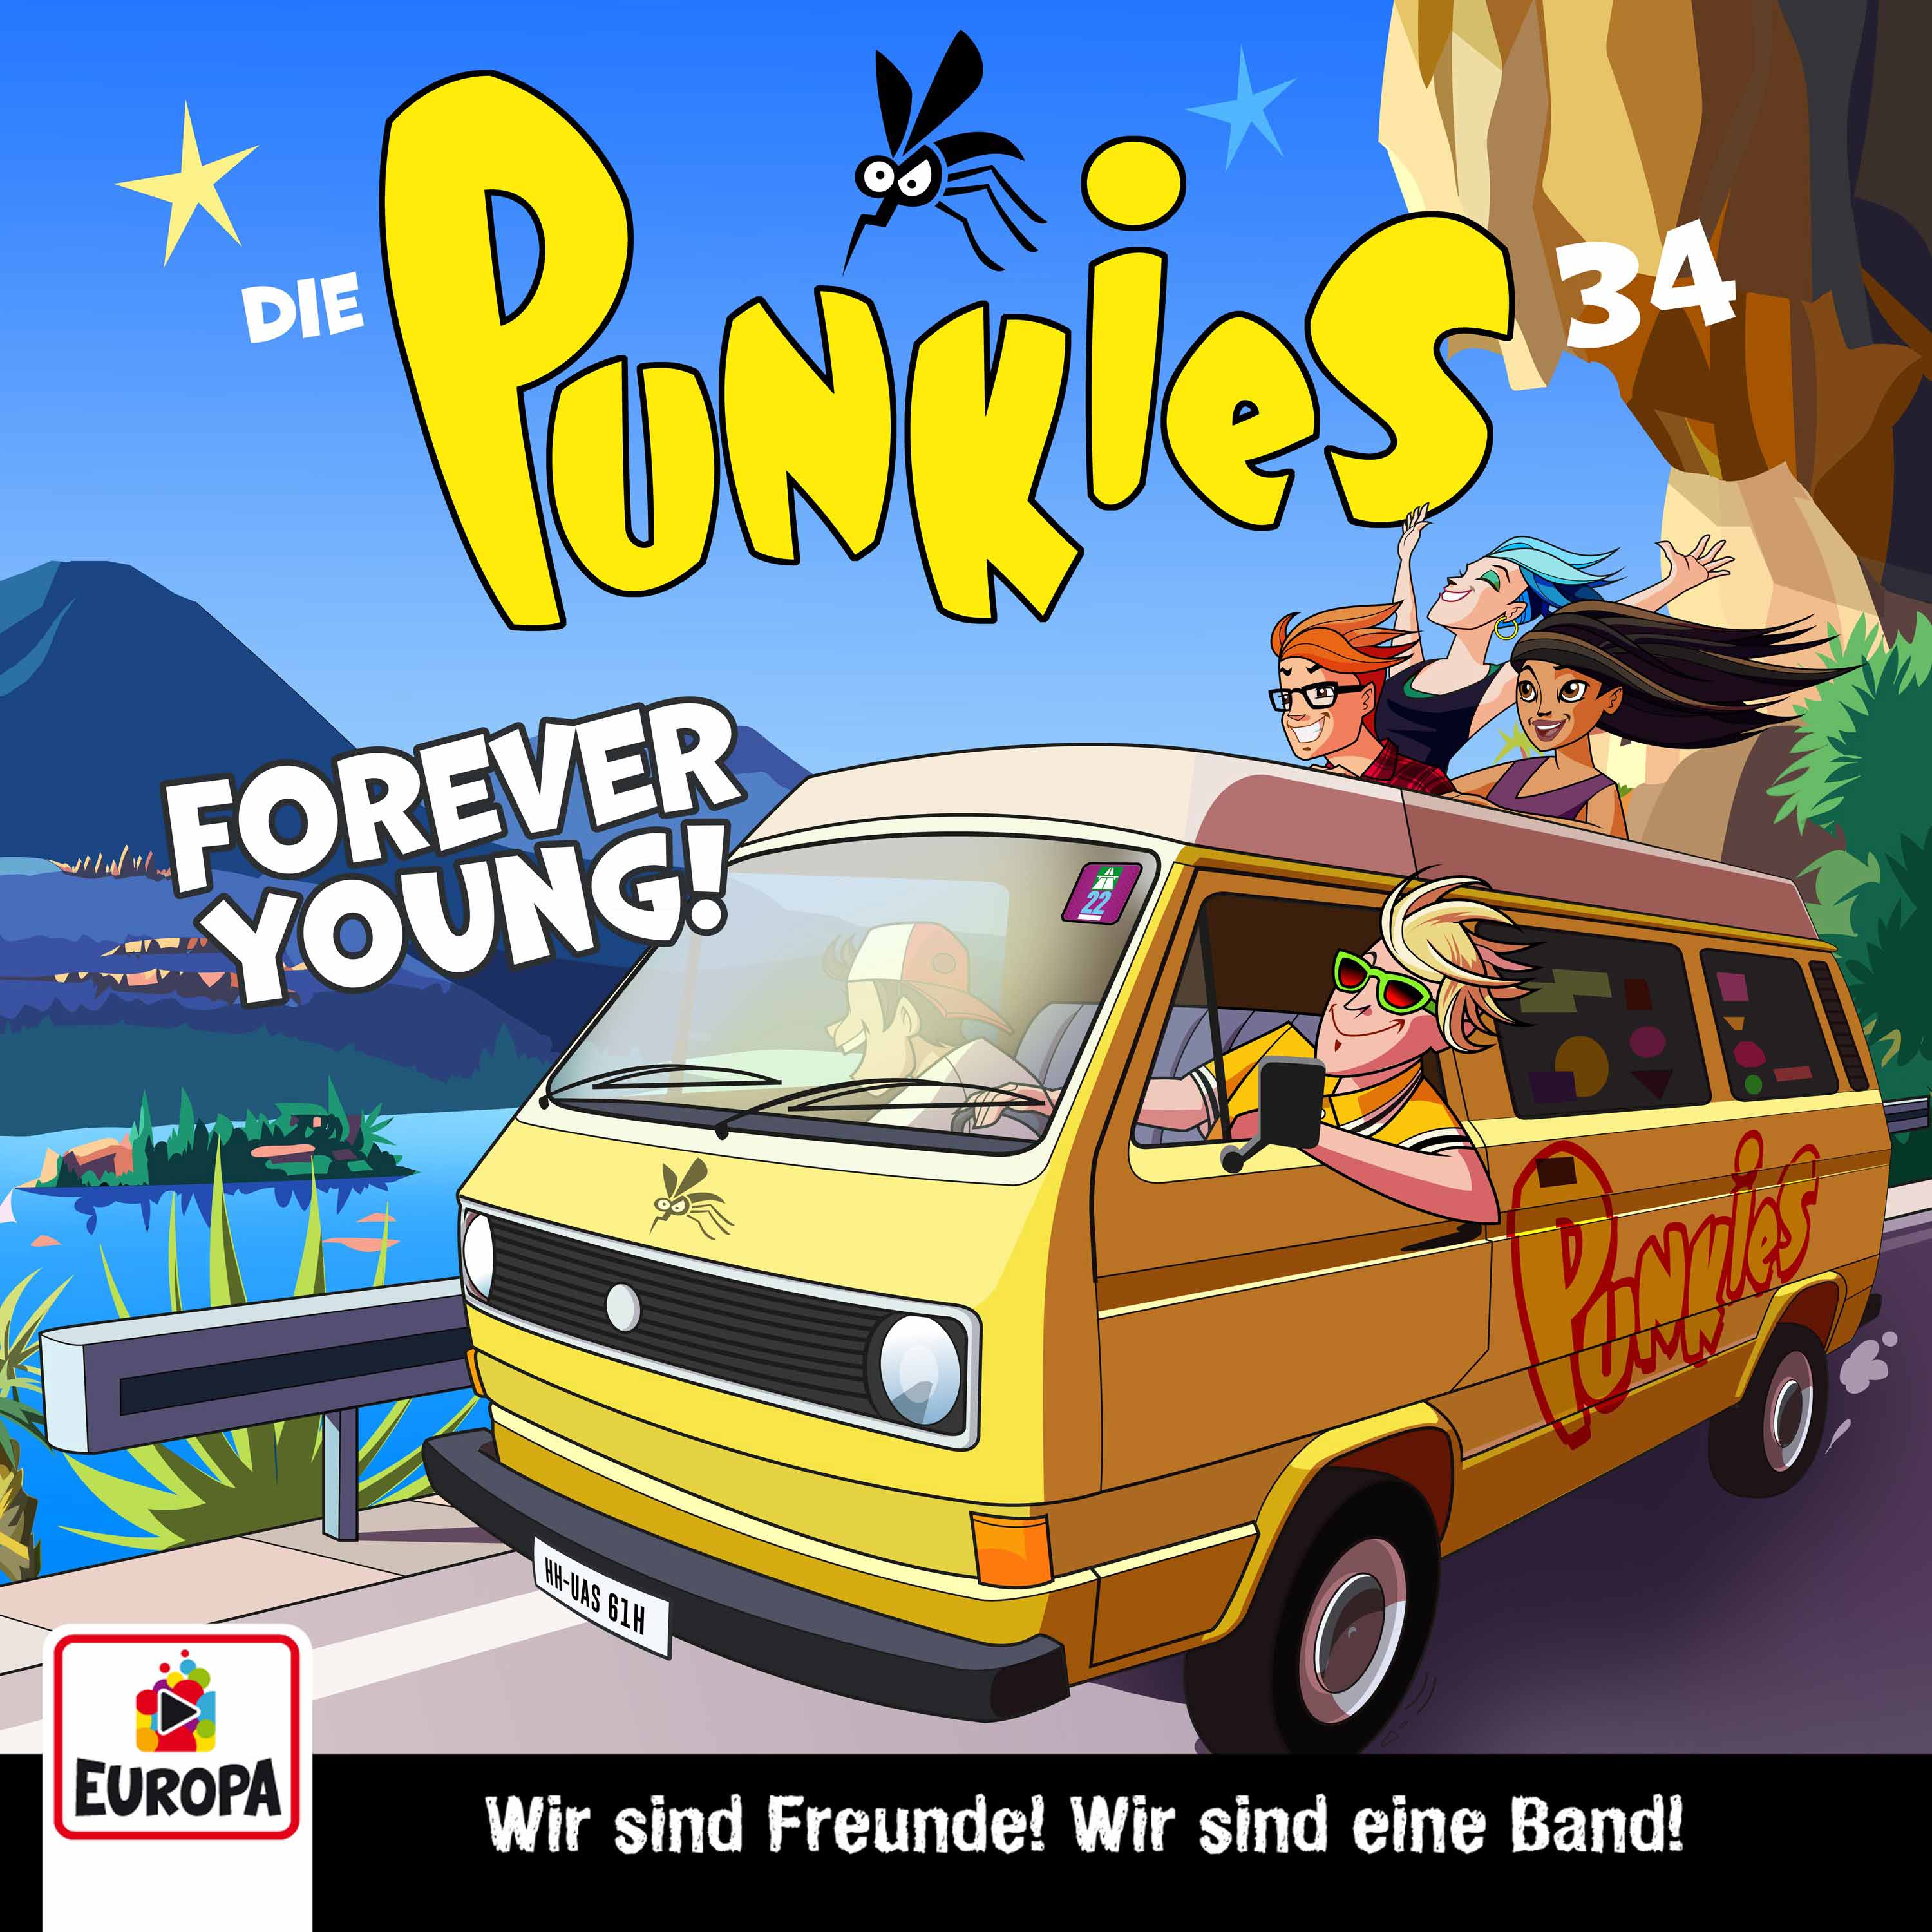 Die Punkies  - Forever Young!